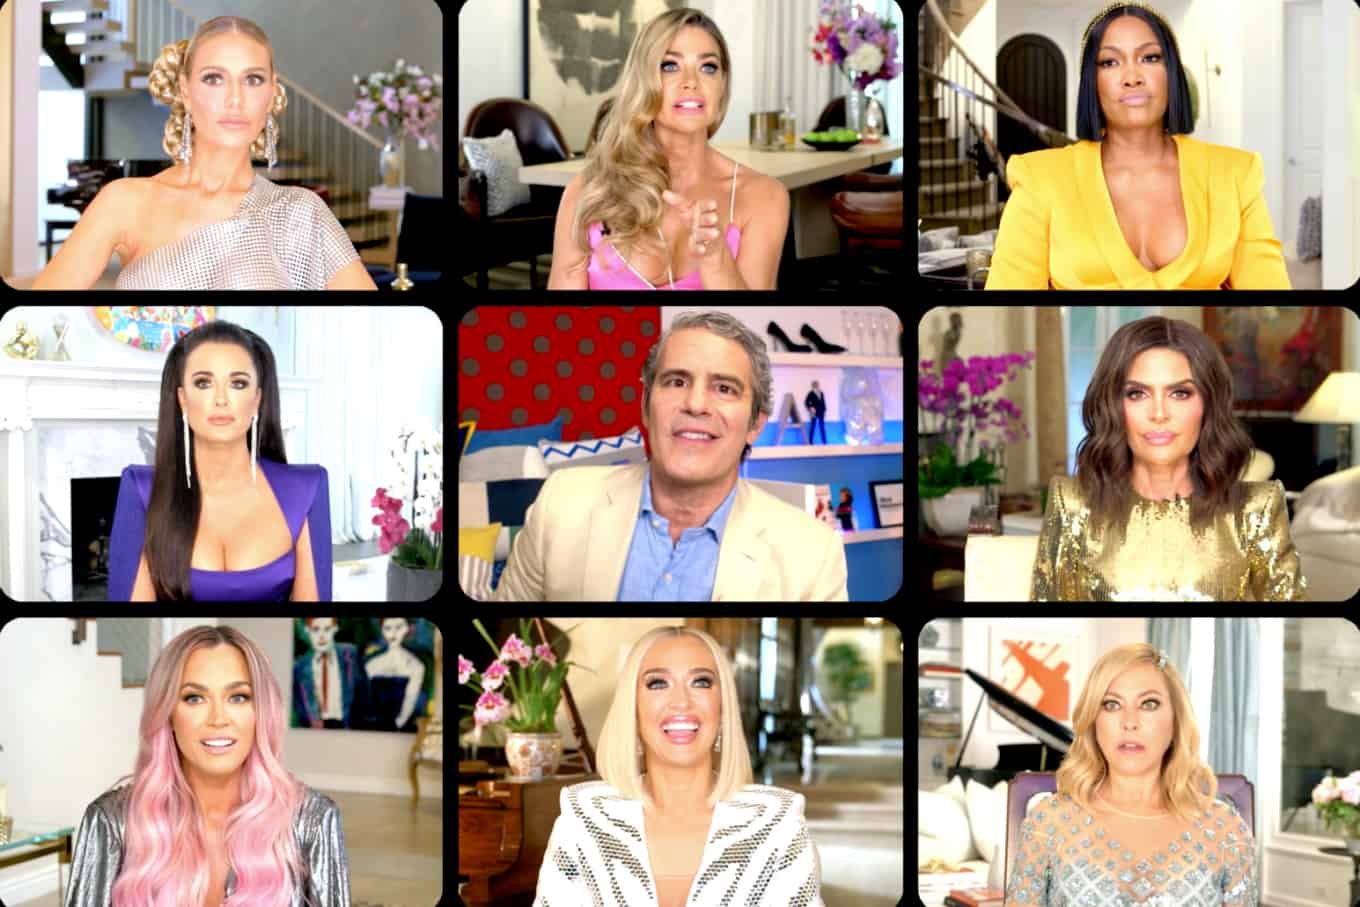 VIDEO: Watch the RHOBH Season 10 Reunion Trailer! Denise Labels Cast as "Vicious" as Lisa Rinna Slams Her Many "Lies," Plus Kyle Accuses Garcelle of Stiffing Her Charity and Denise Storms Off in Tears